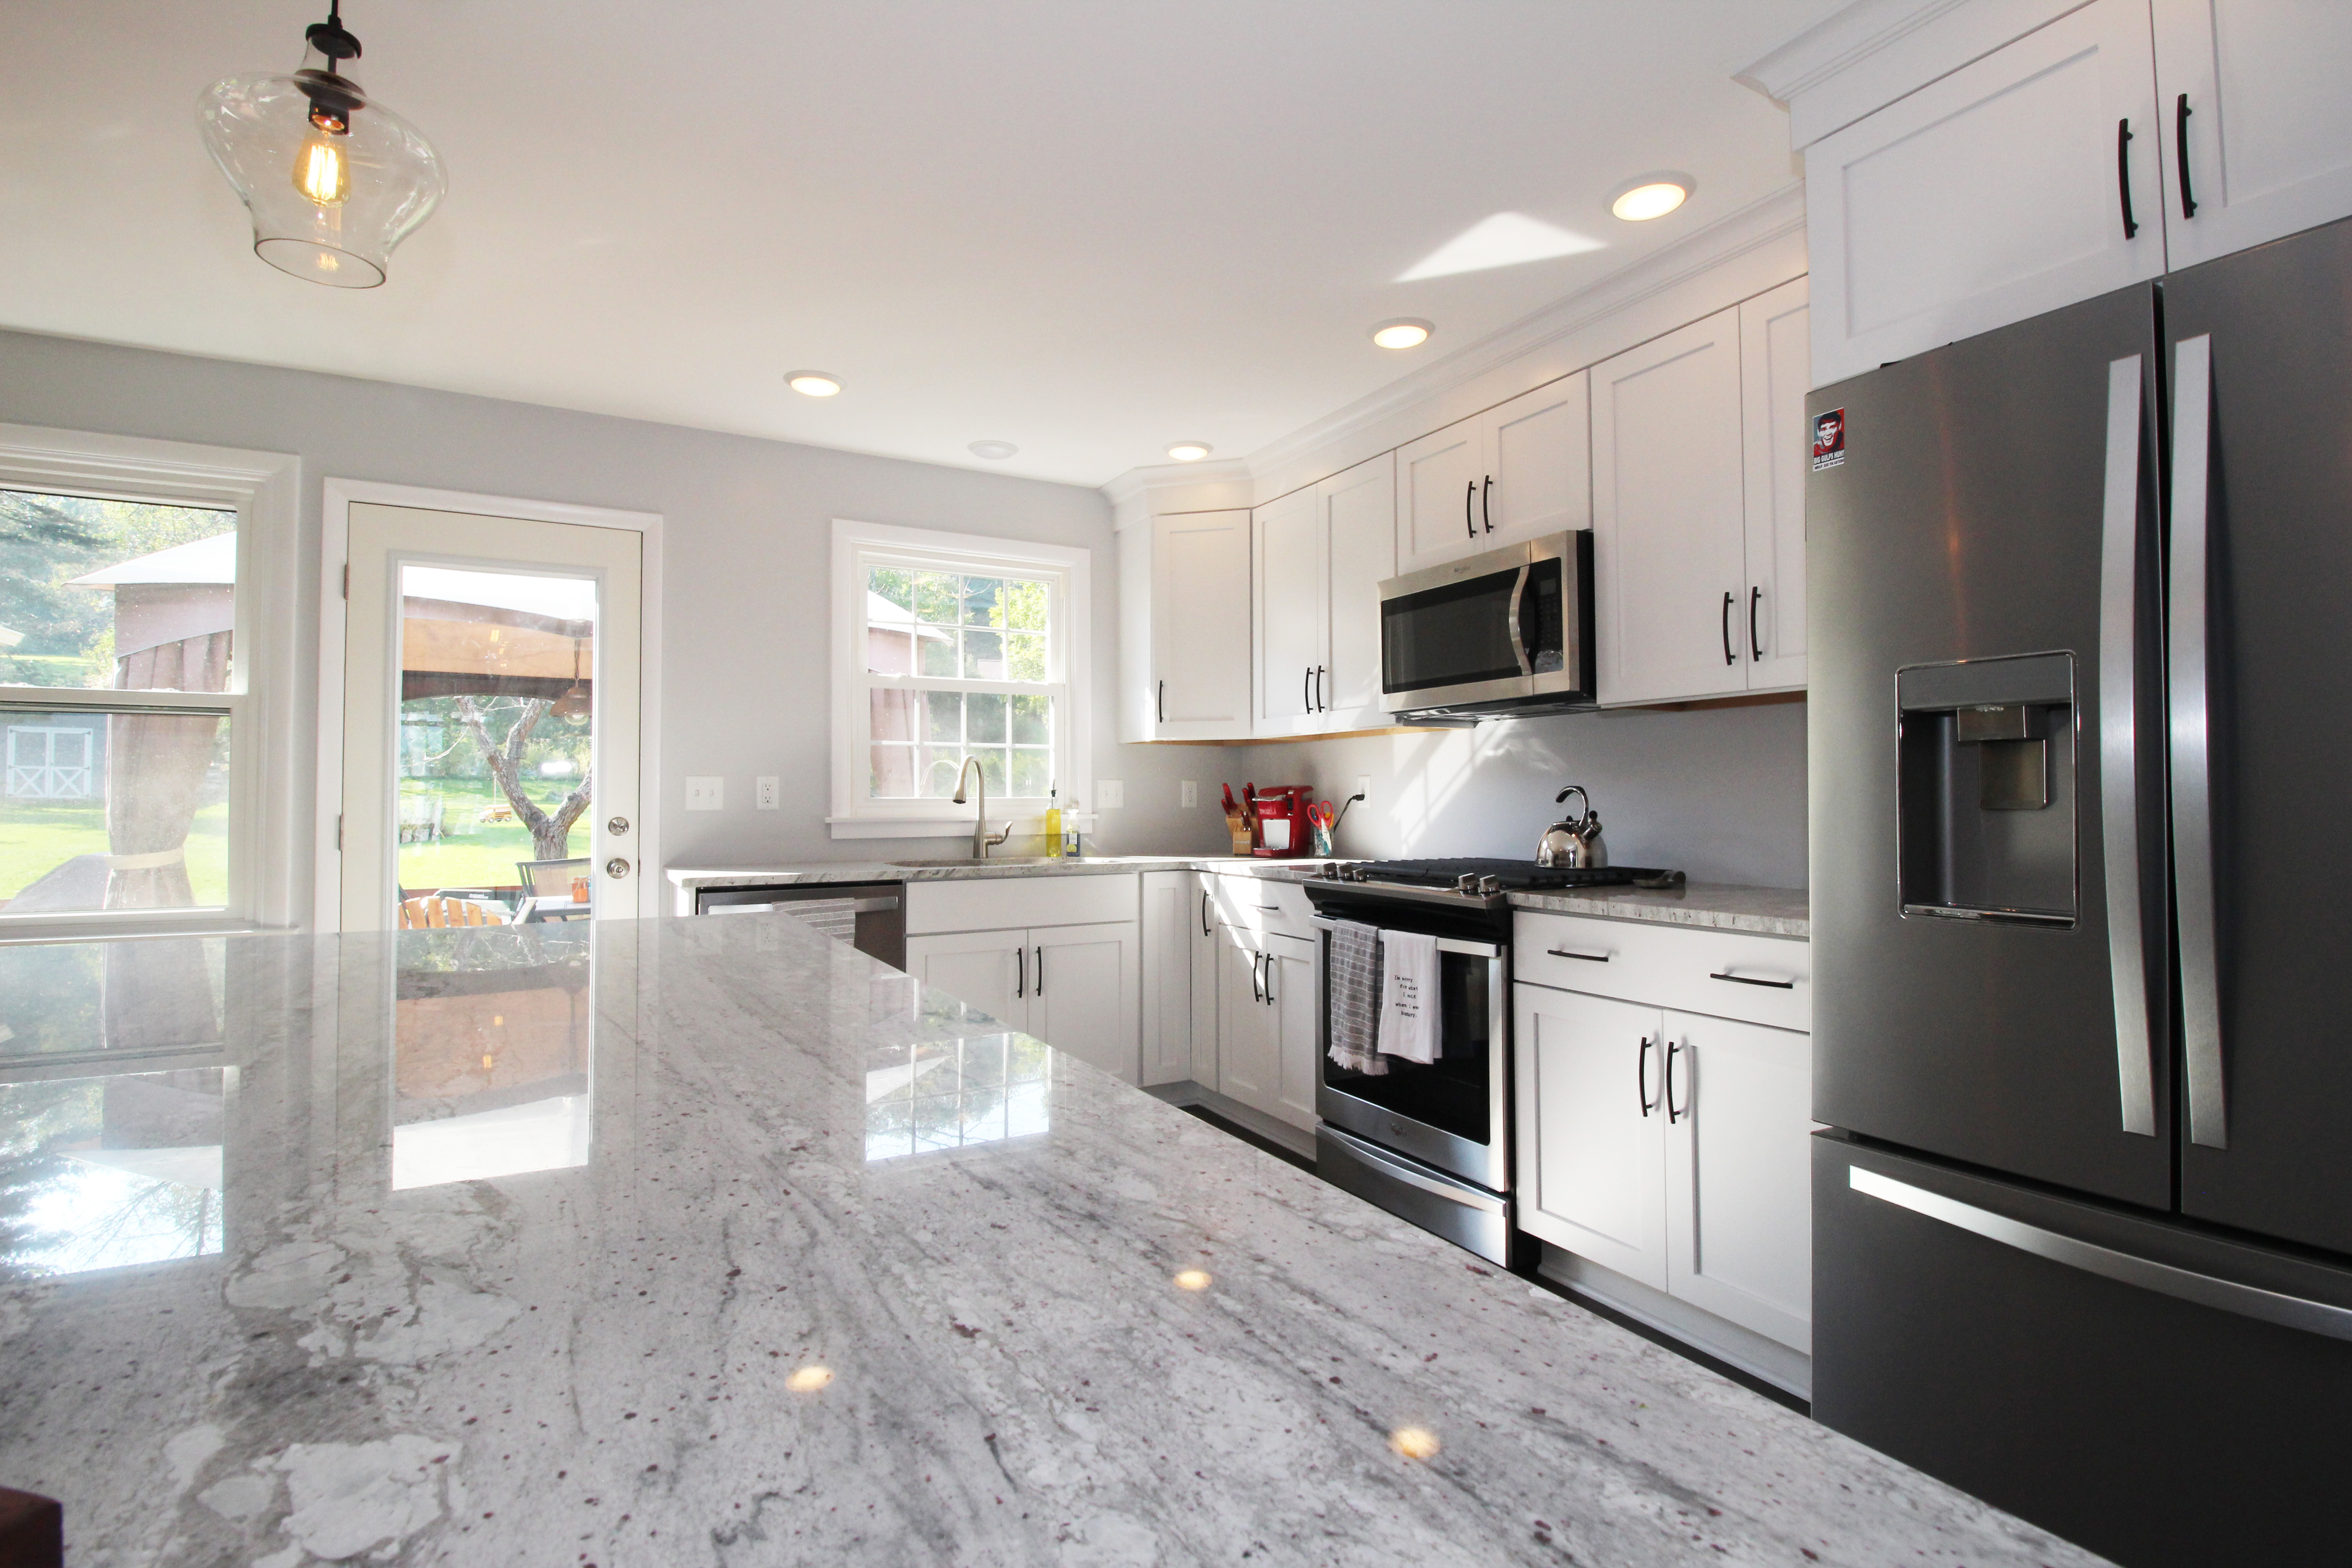 Remodeled kitchen with granite countertops